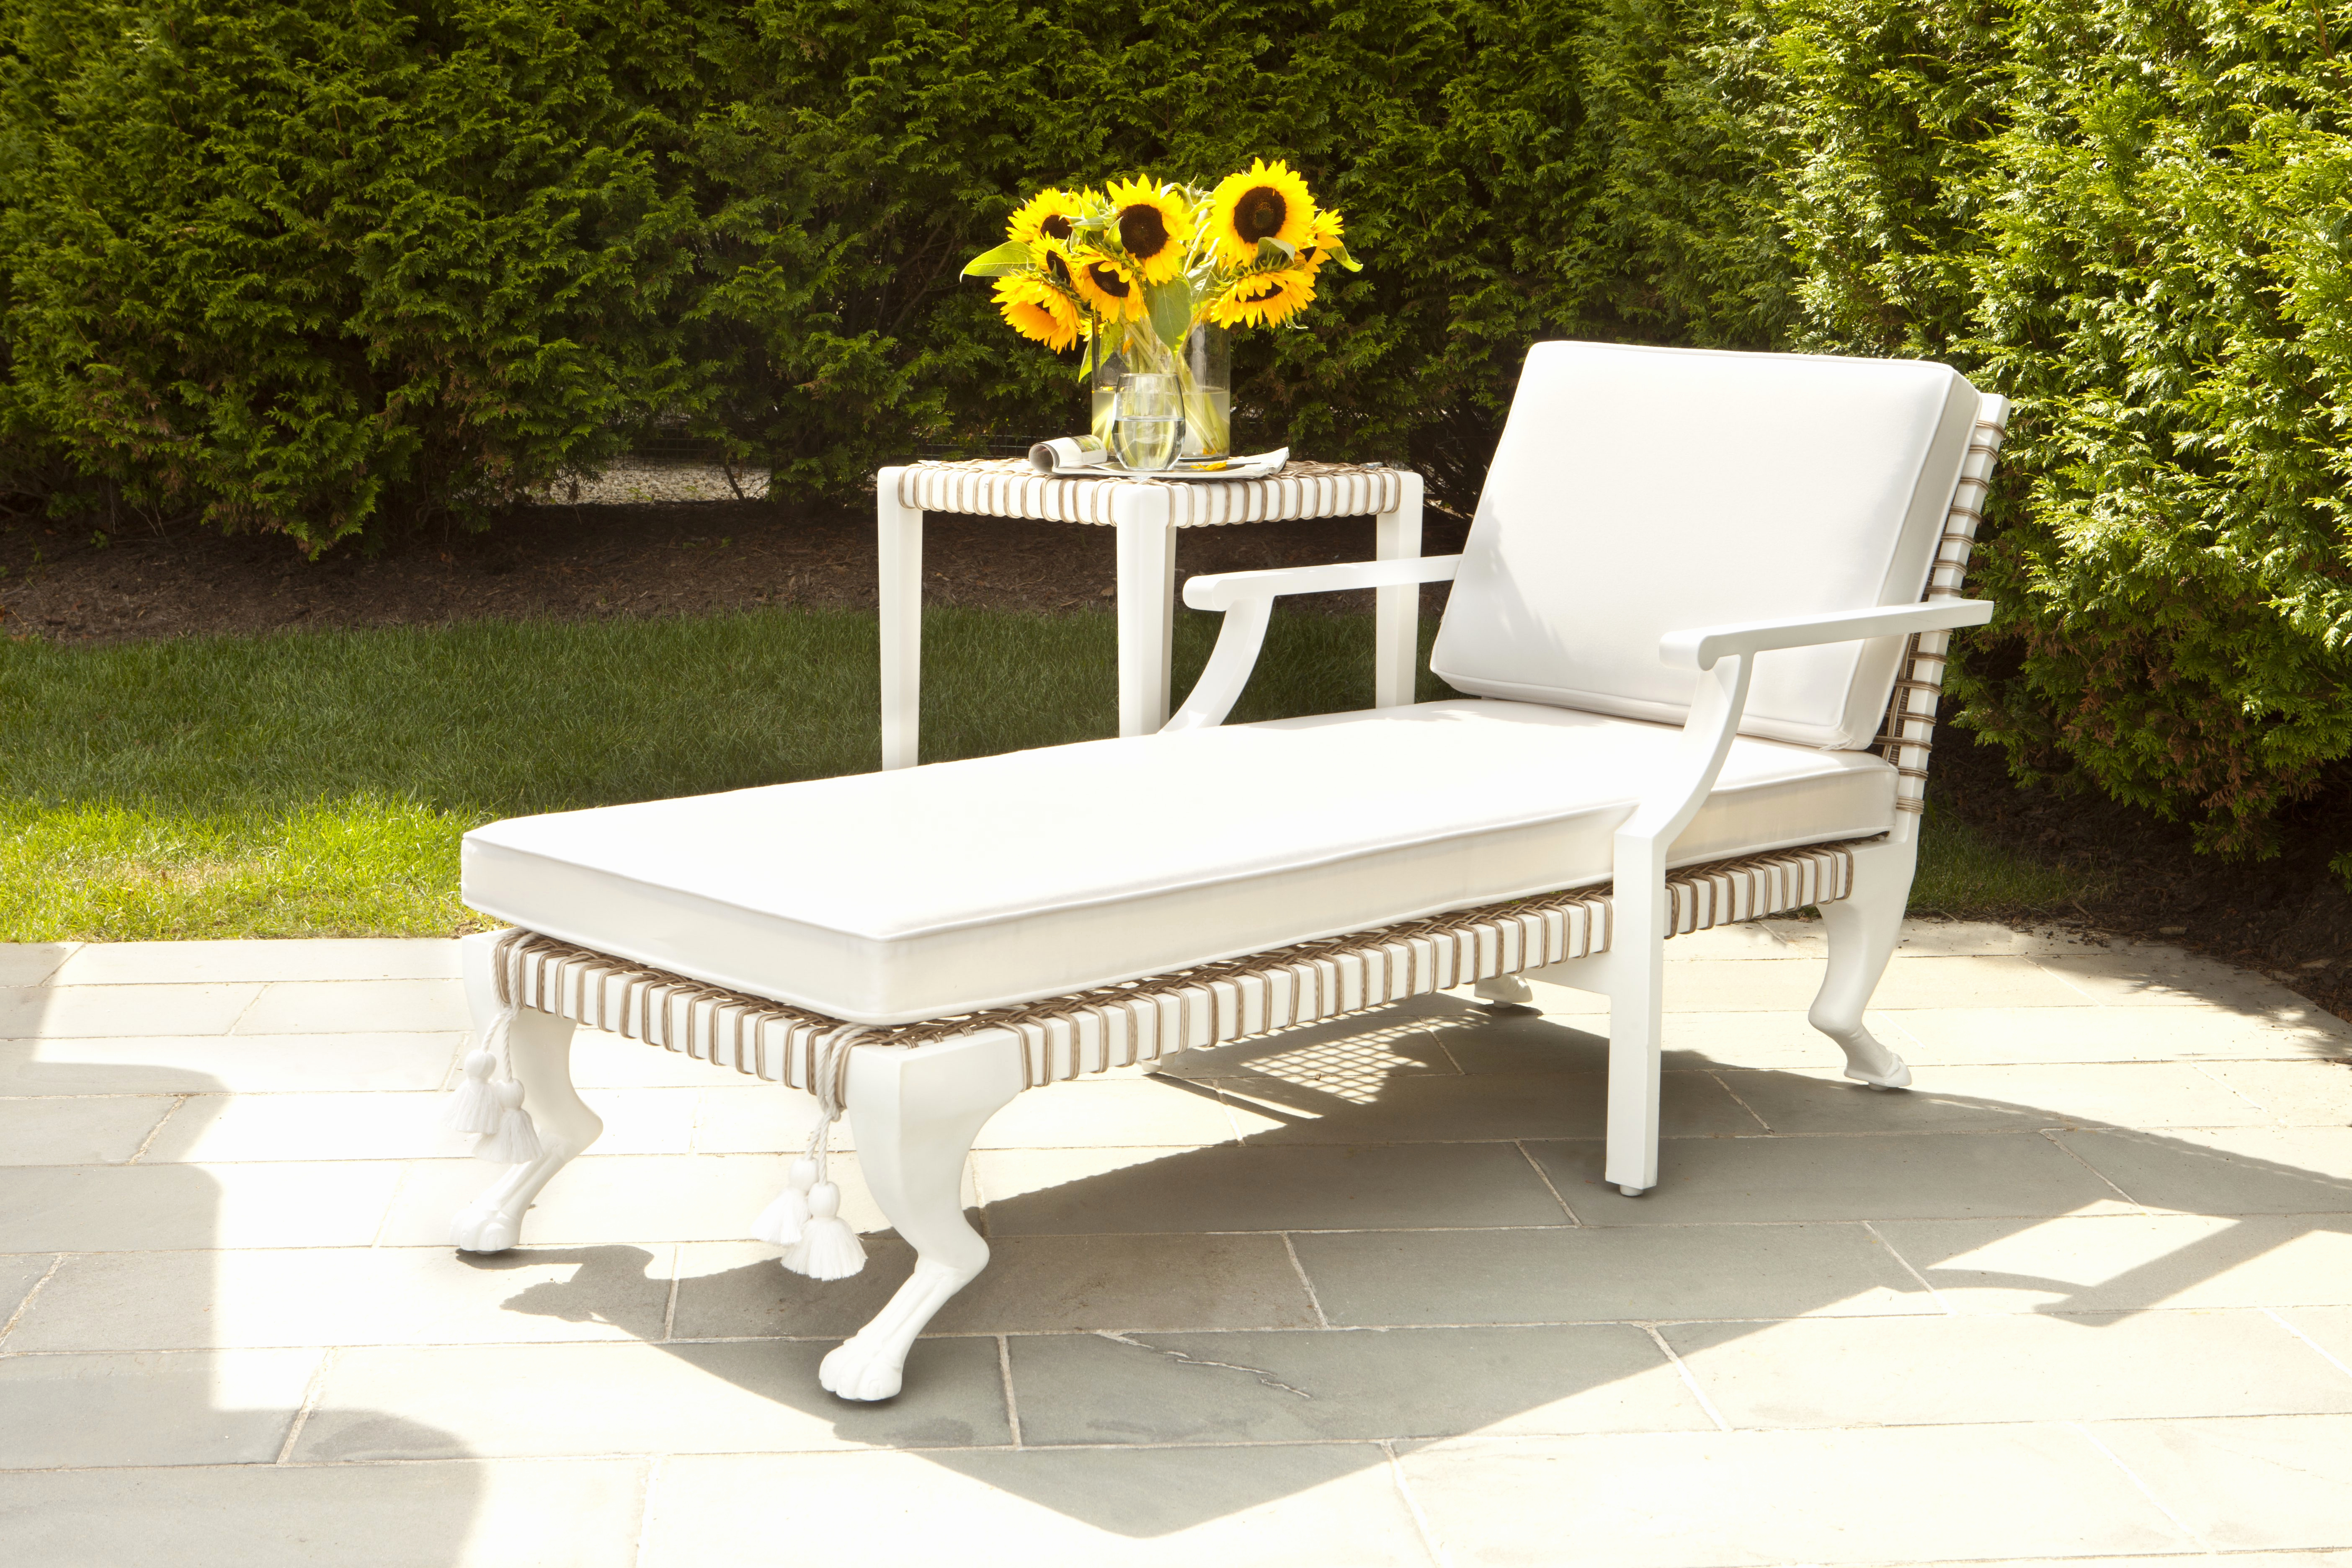 Academy Outdoor Furniture Lovely Academy Patio Furniture Luxury throughout size 5616 X 3744